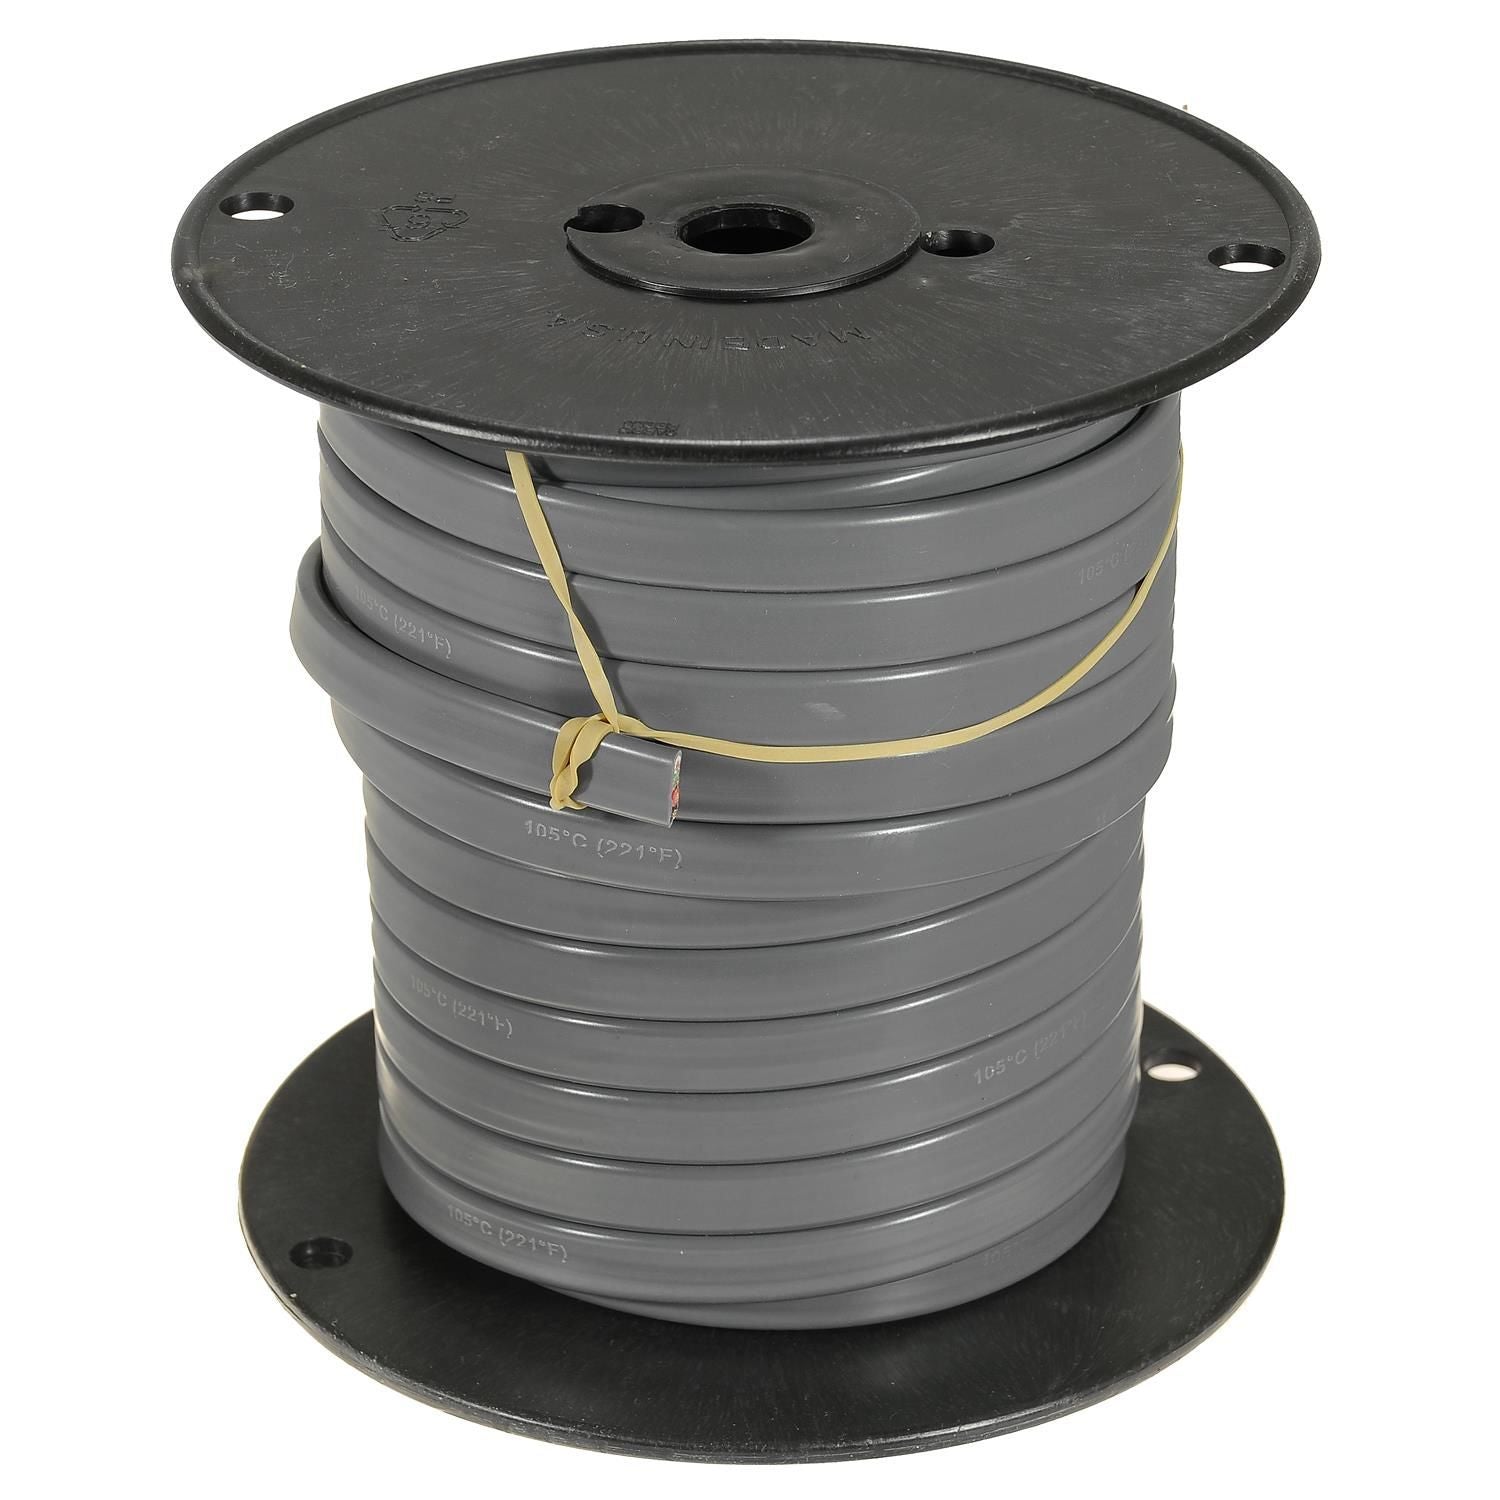 YSP WR129-100 Wells Flat Multi-Conductor Primary Wire (16G, 4 Wire)